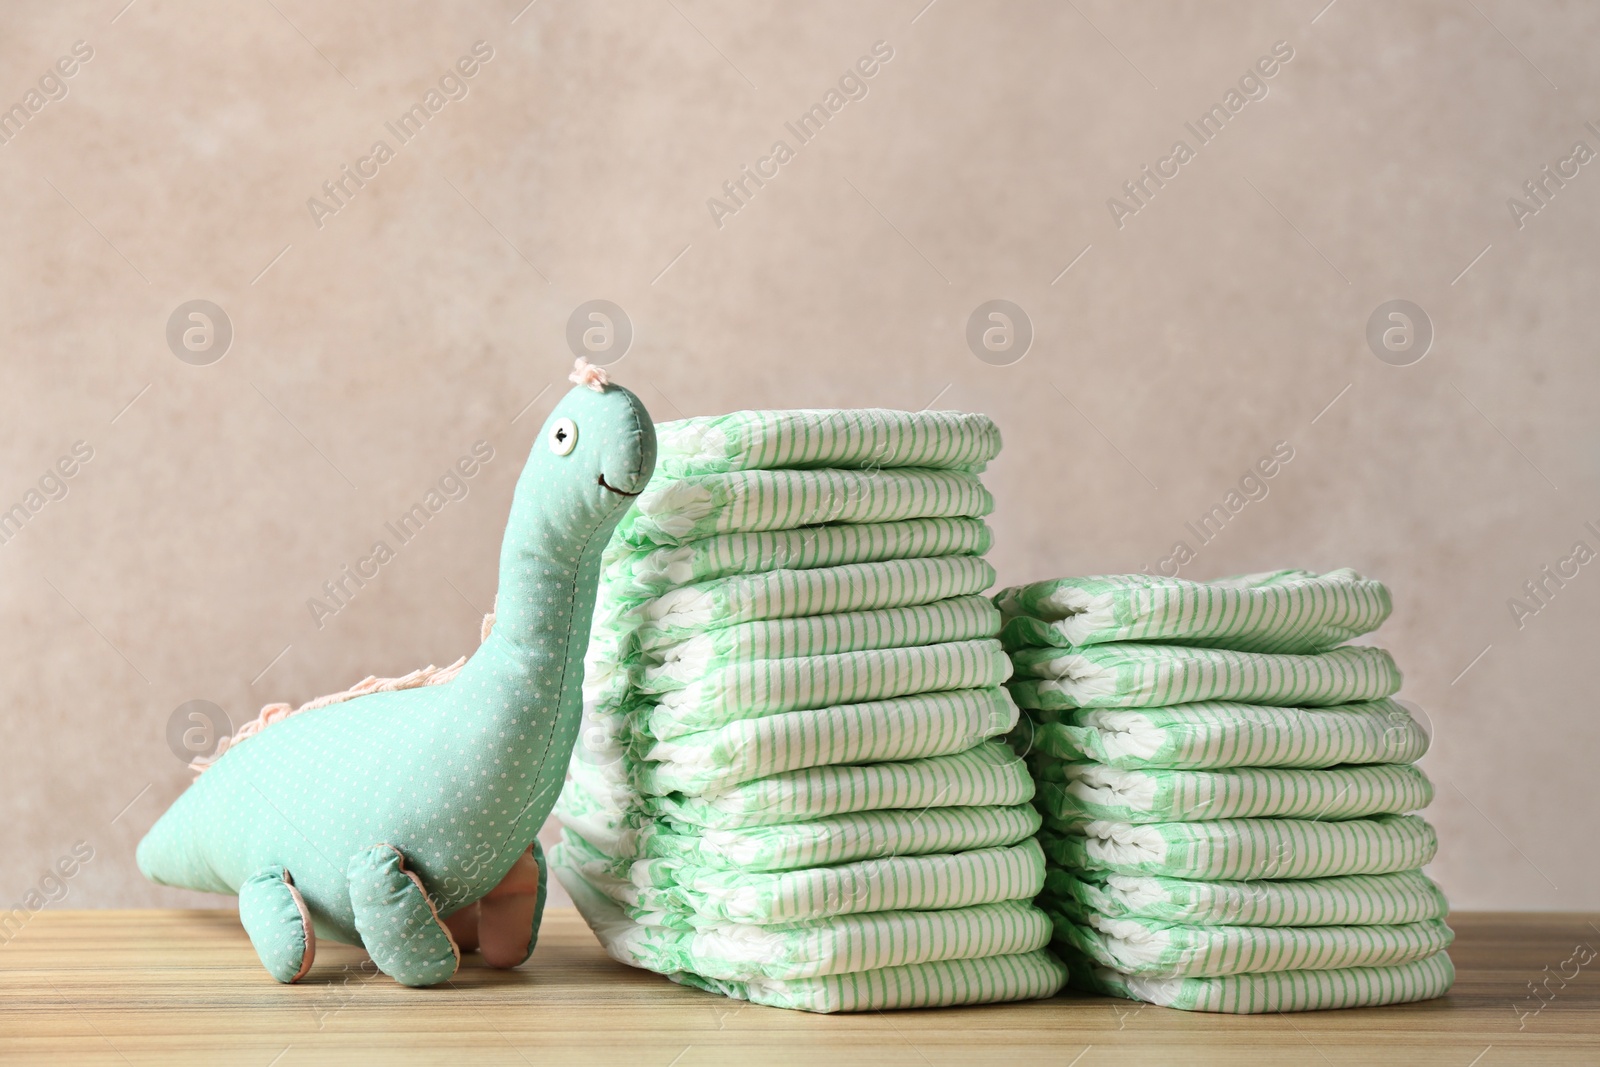 Photo of Stacks of diapers and toy dinosaur on table against color background. Baby accessories